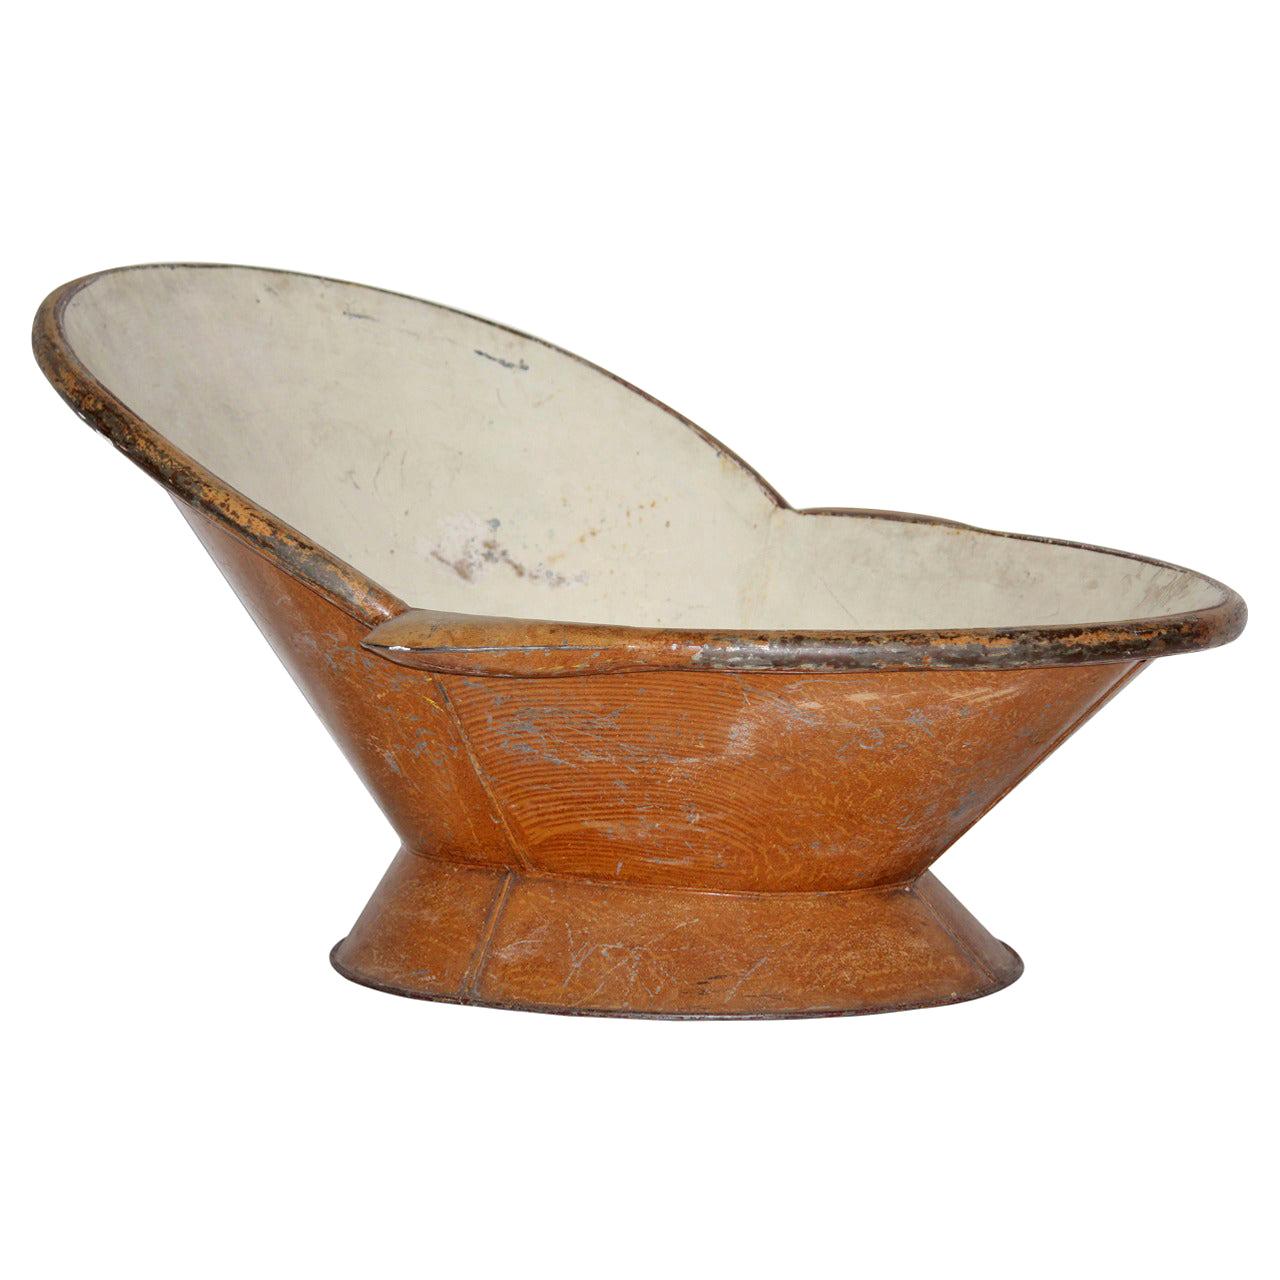 'Butch Cassidy' Hip Bath Tub Painted Finish with Provenance, circa 1895 For Sale